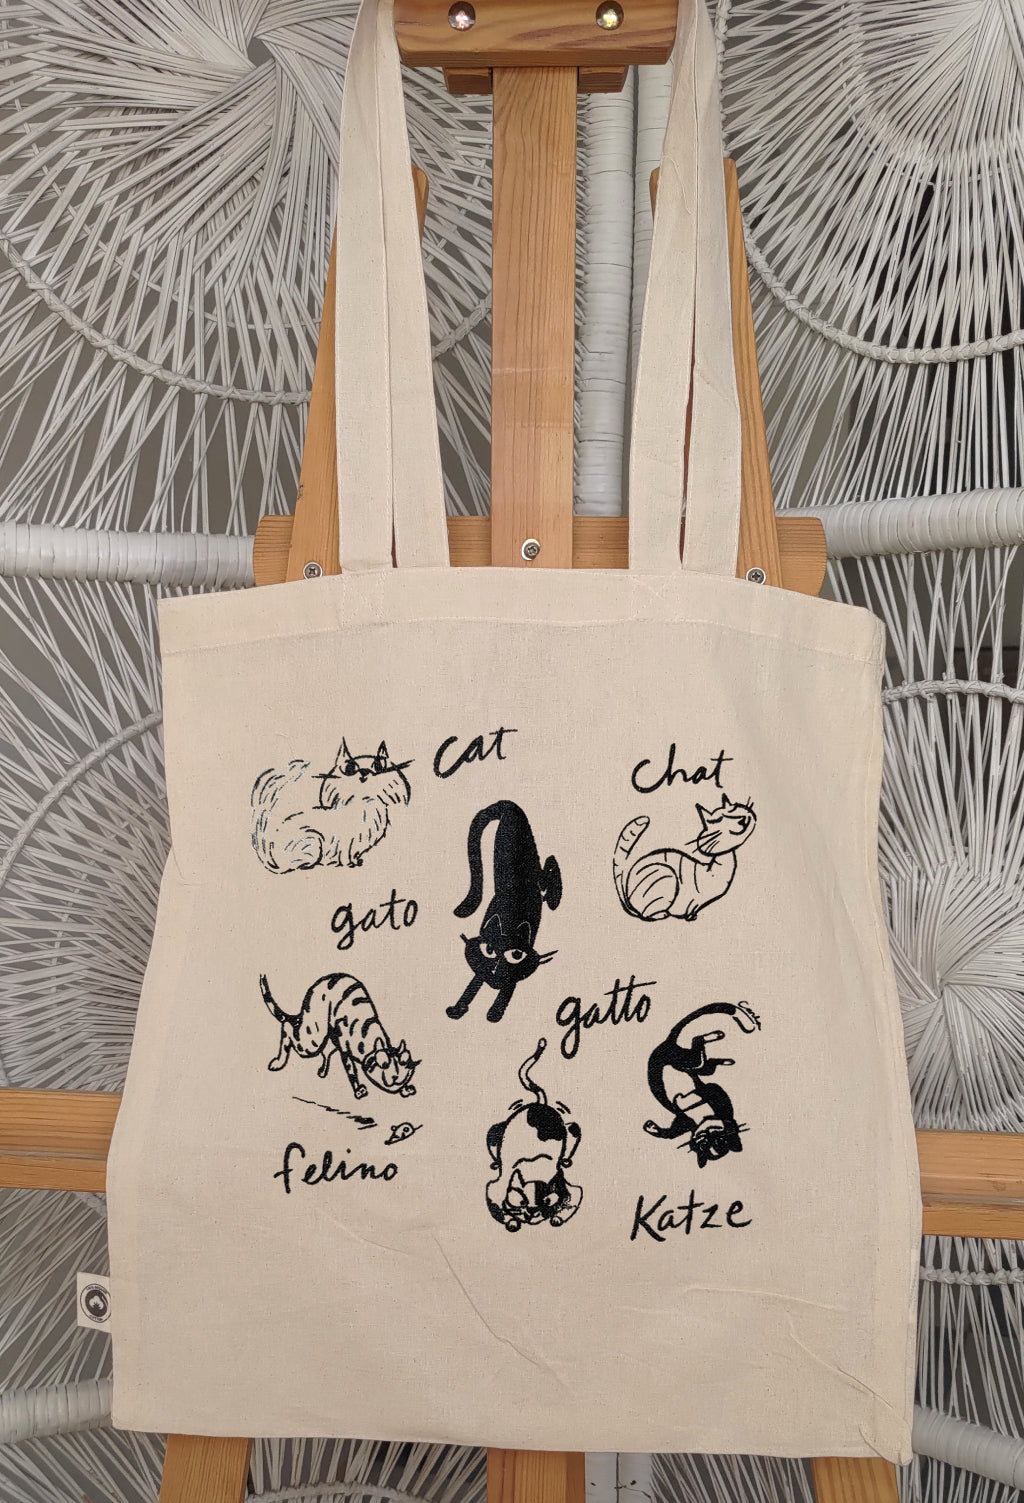 Cats breeds of the World Persian Calico Tabby Tuxedo, Bengal, Long haired handmade on organic tote bag by Carla Ventresca Miller Art